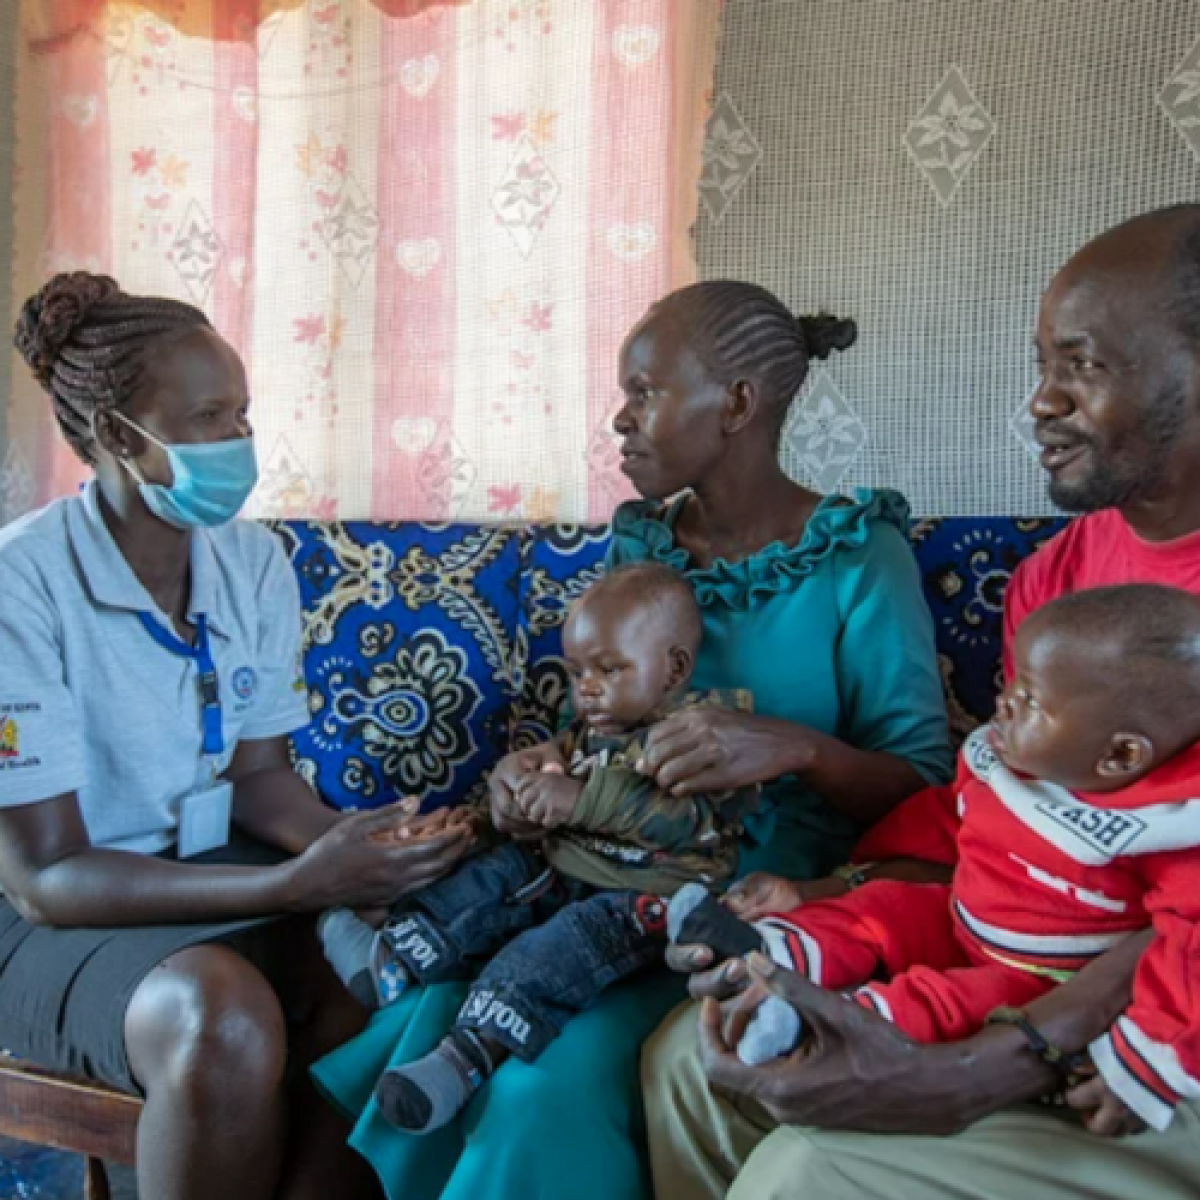 Community health worker, Catherine, spends time educating a family on how to keep everyone safe and healthy in Baringo County, Kenya.